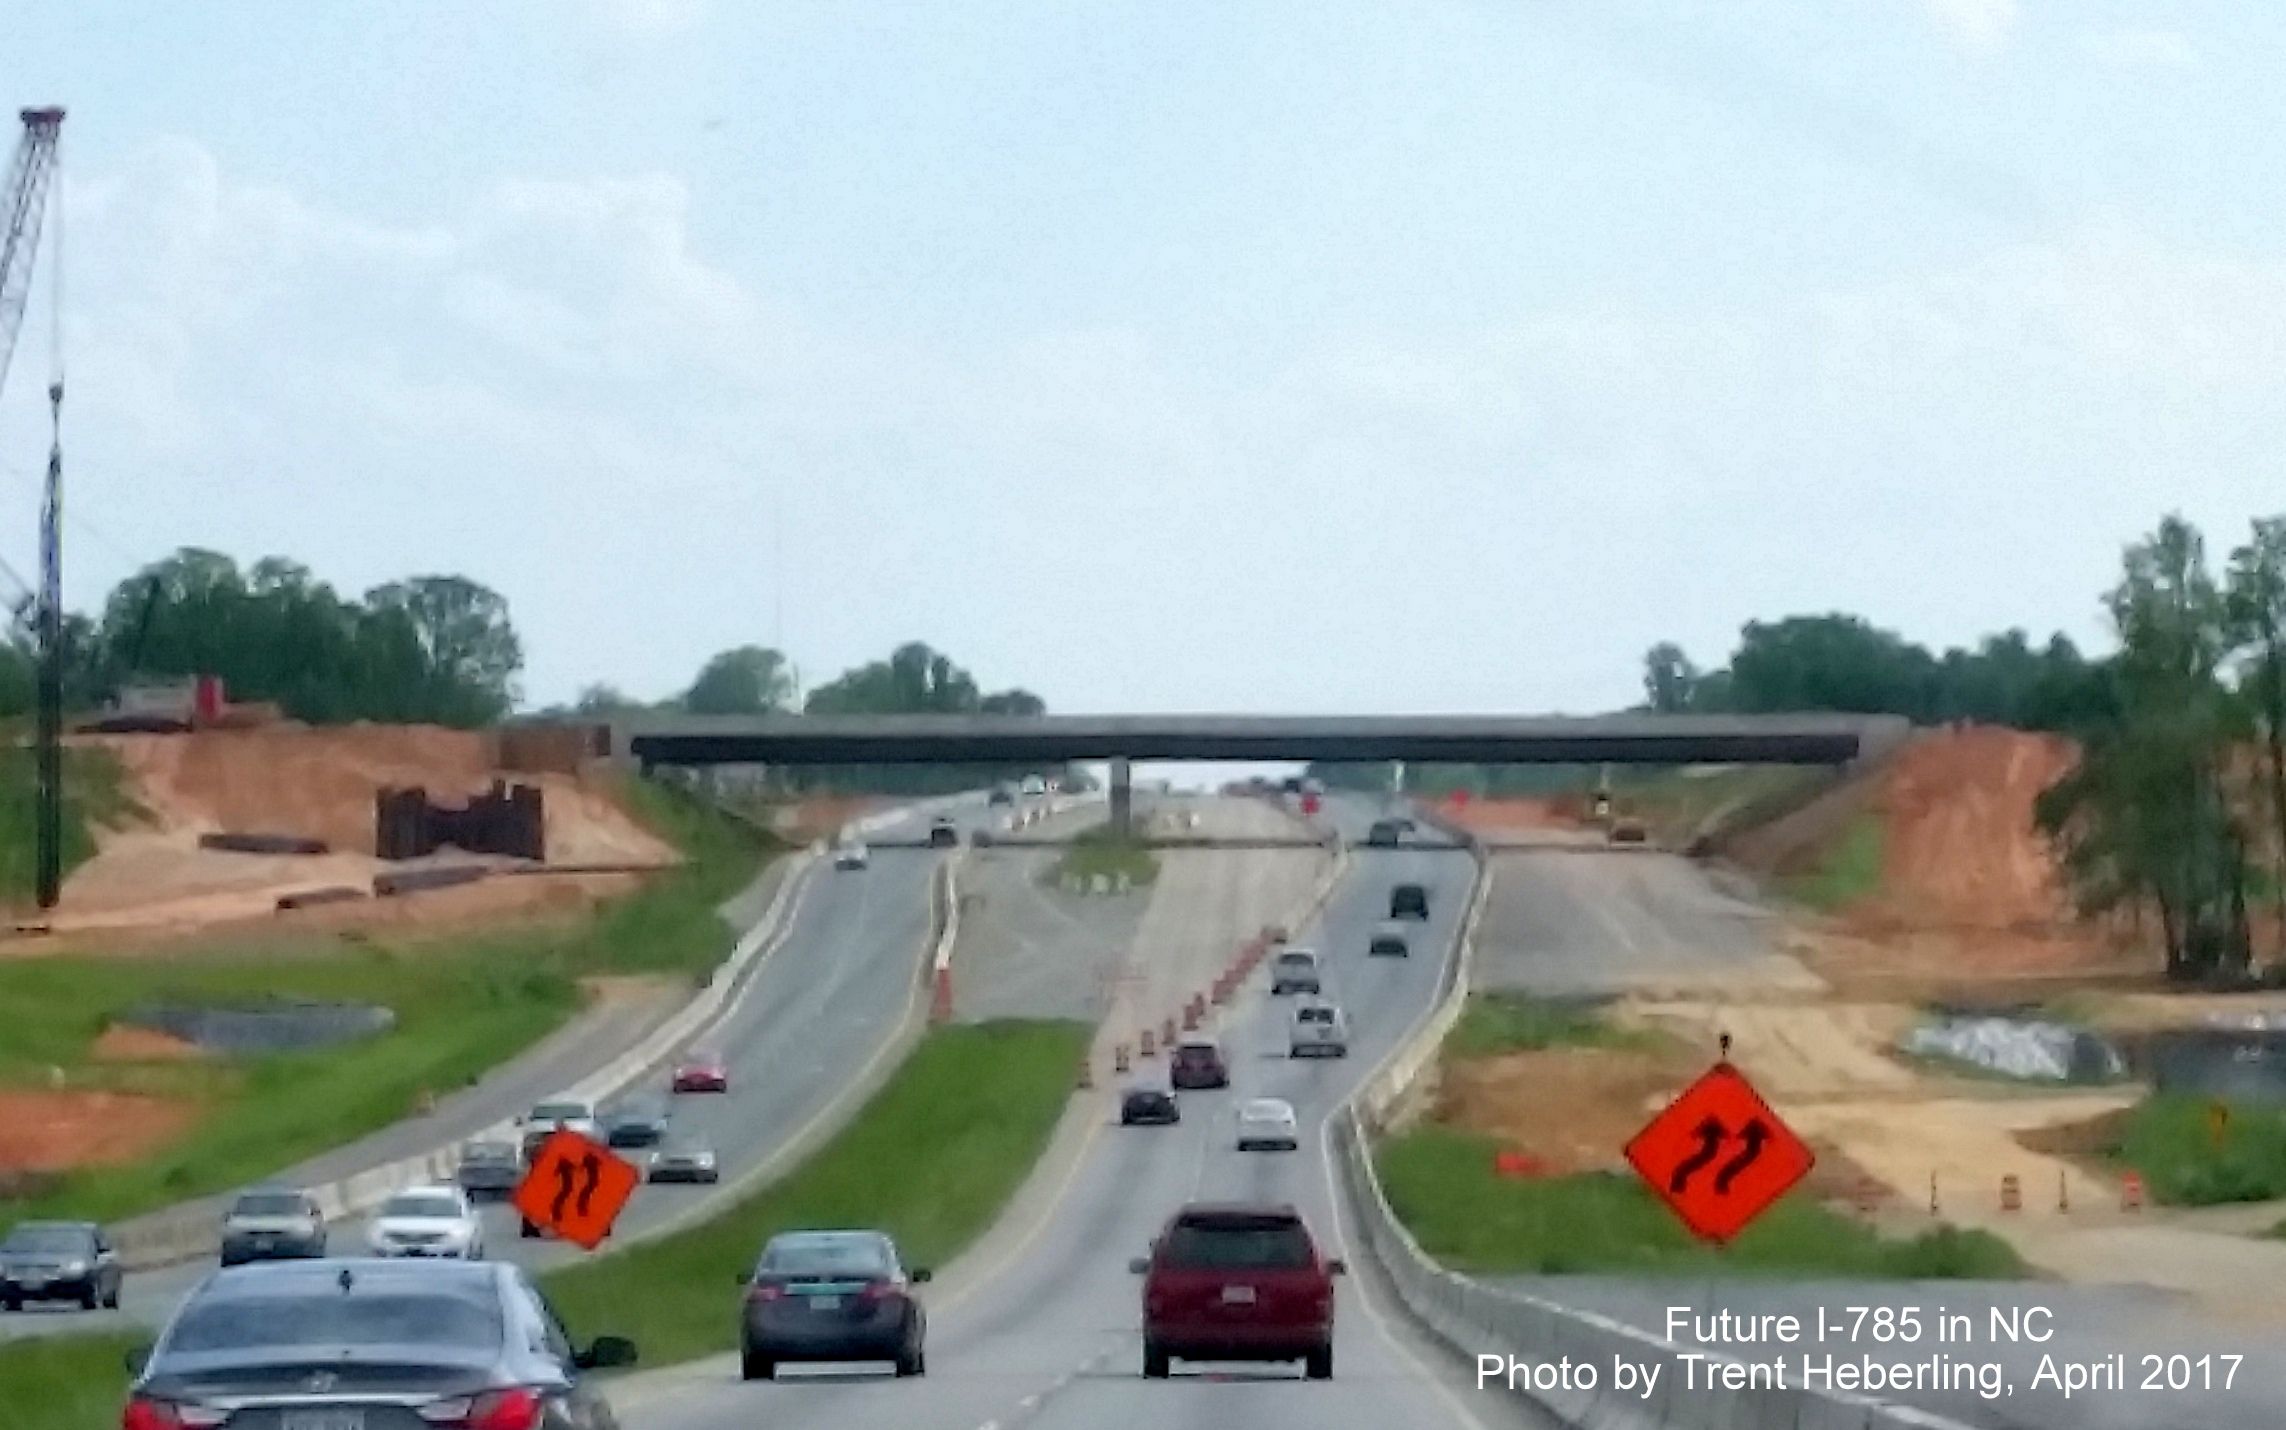 Image looking south on US 29 toward Future I-785/Greensboro Loop interchange under construction, by Trent Heberling